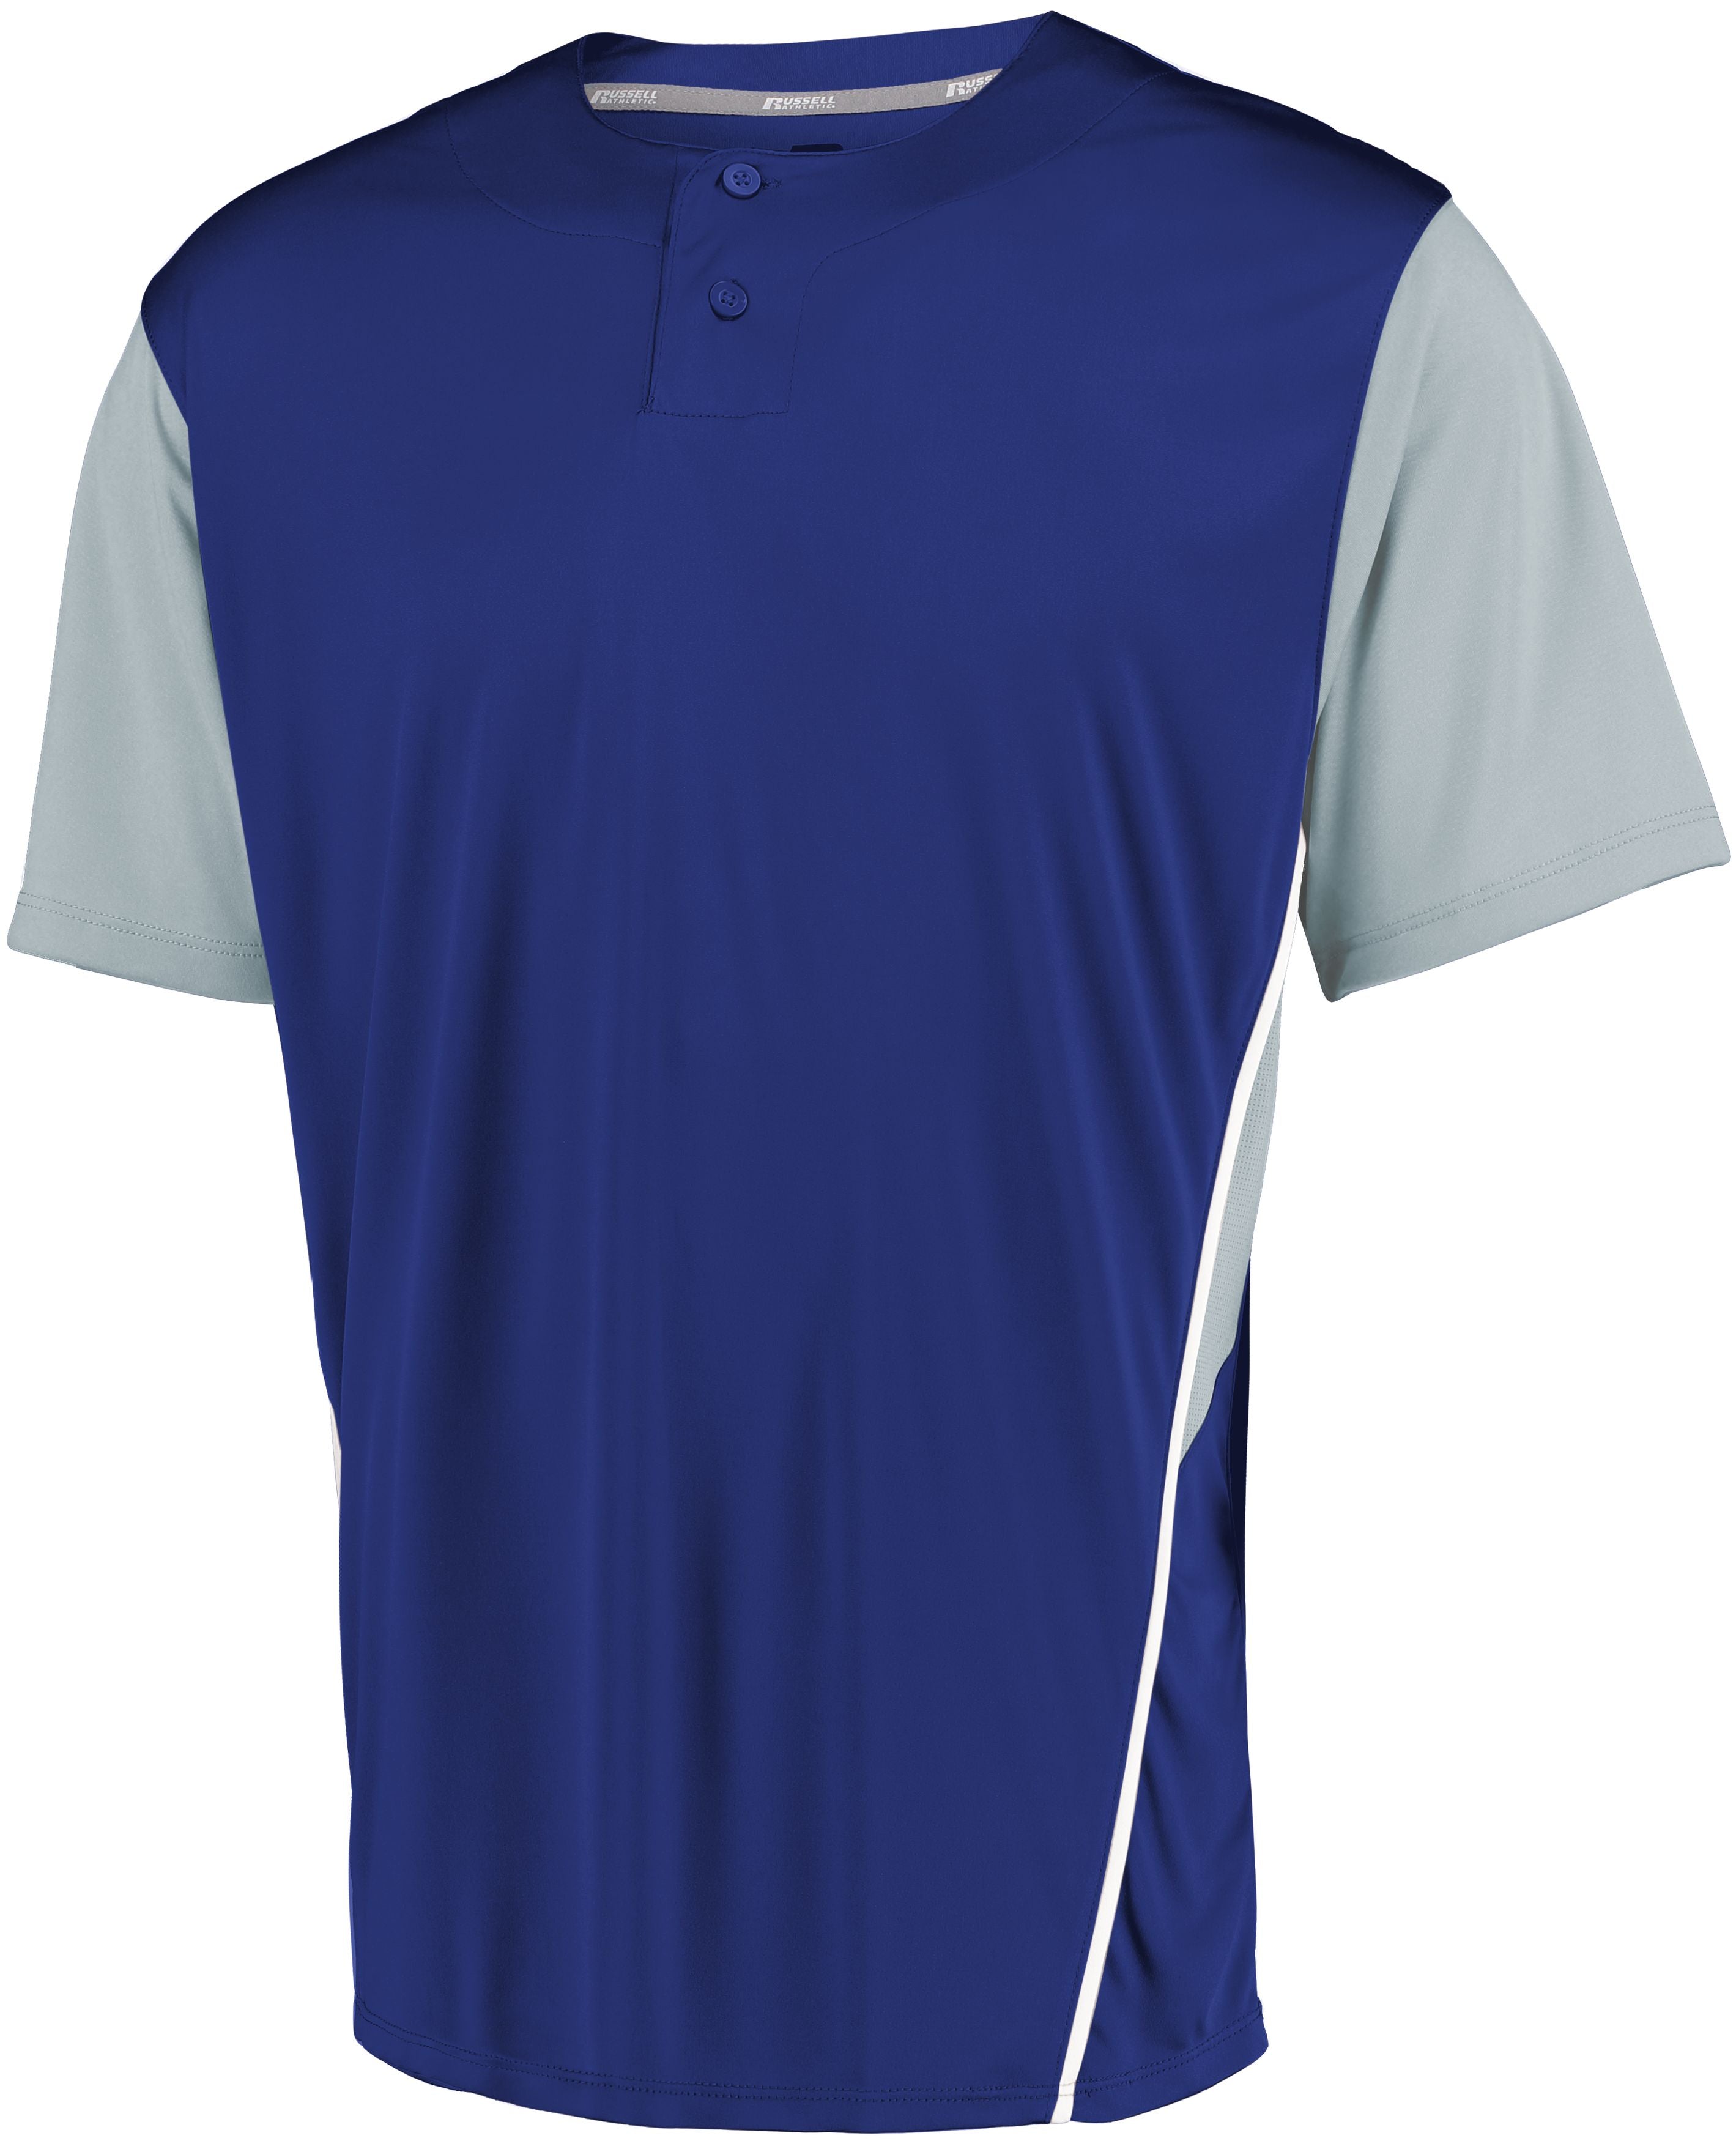 Russell Athletic Youth Two-Button Placket Jersey in Royal/Baseball Grey  -Part of the Youth, Youth-Jersey, Baseball, Russell-Athletic-Products, Shirts, All-Sports, All-Sports-1 product lines at KanaleyCreations.com